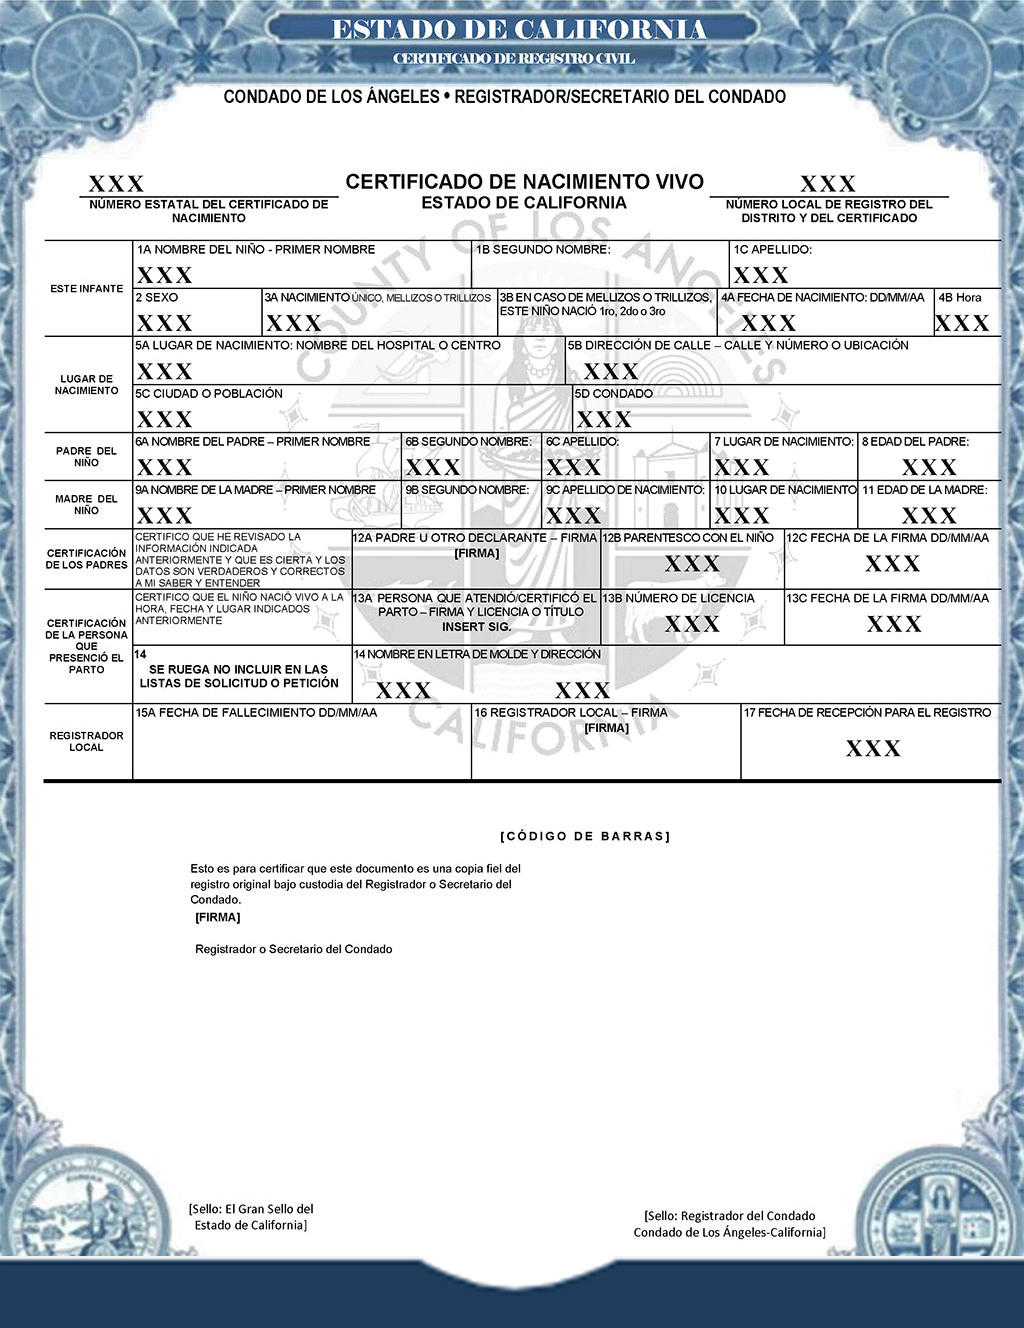 Fast and Accurate Death Certificate Translation Services In Death Certificate Translation Template